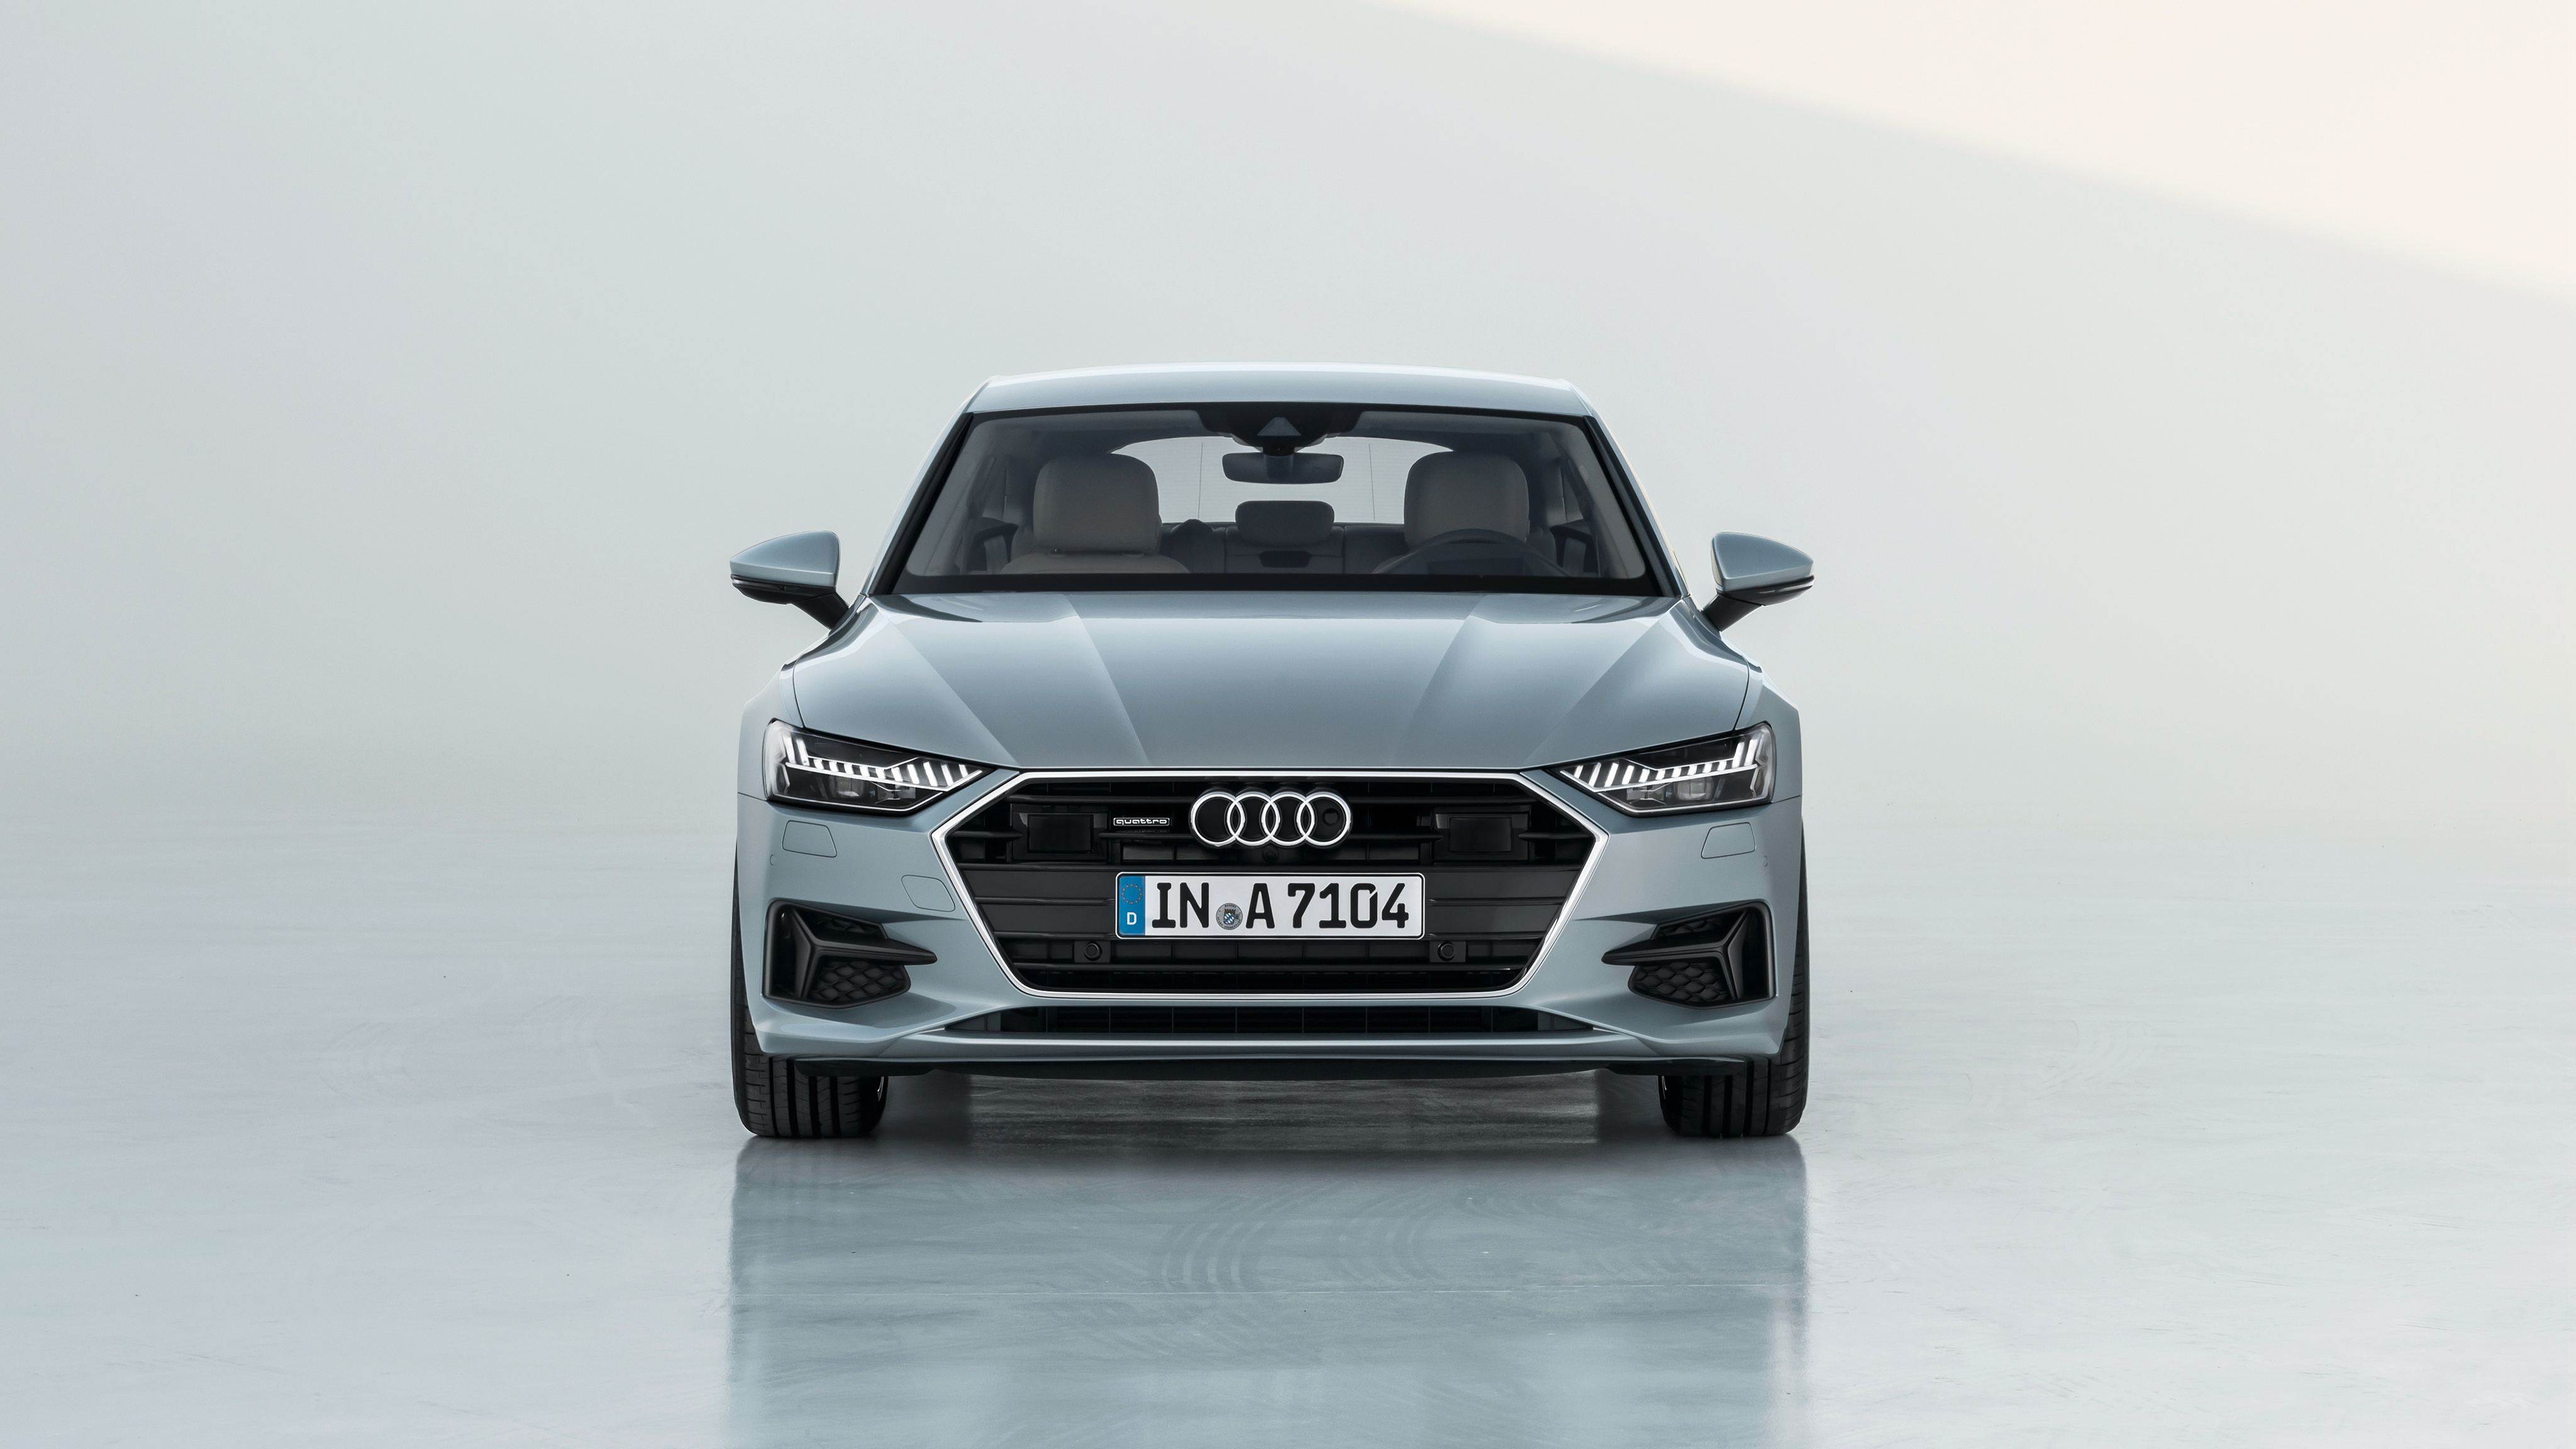 Audi A7 2018 Front , HD Wallpaper & Backgrounds